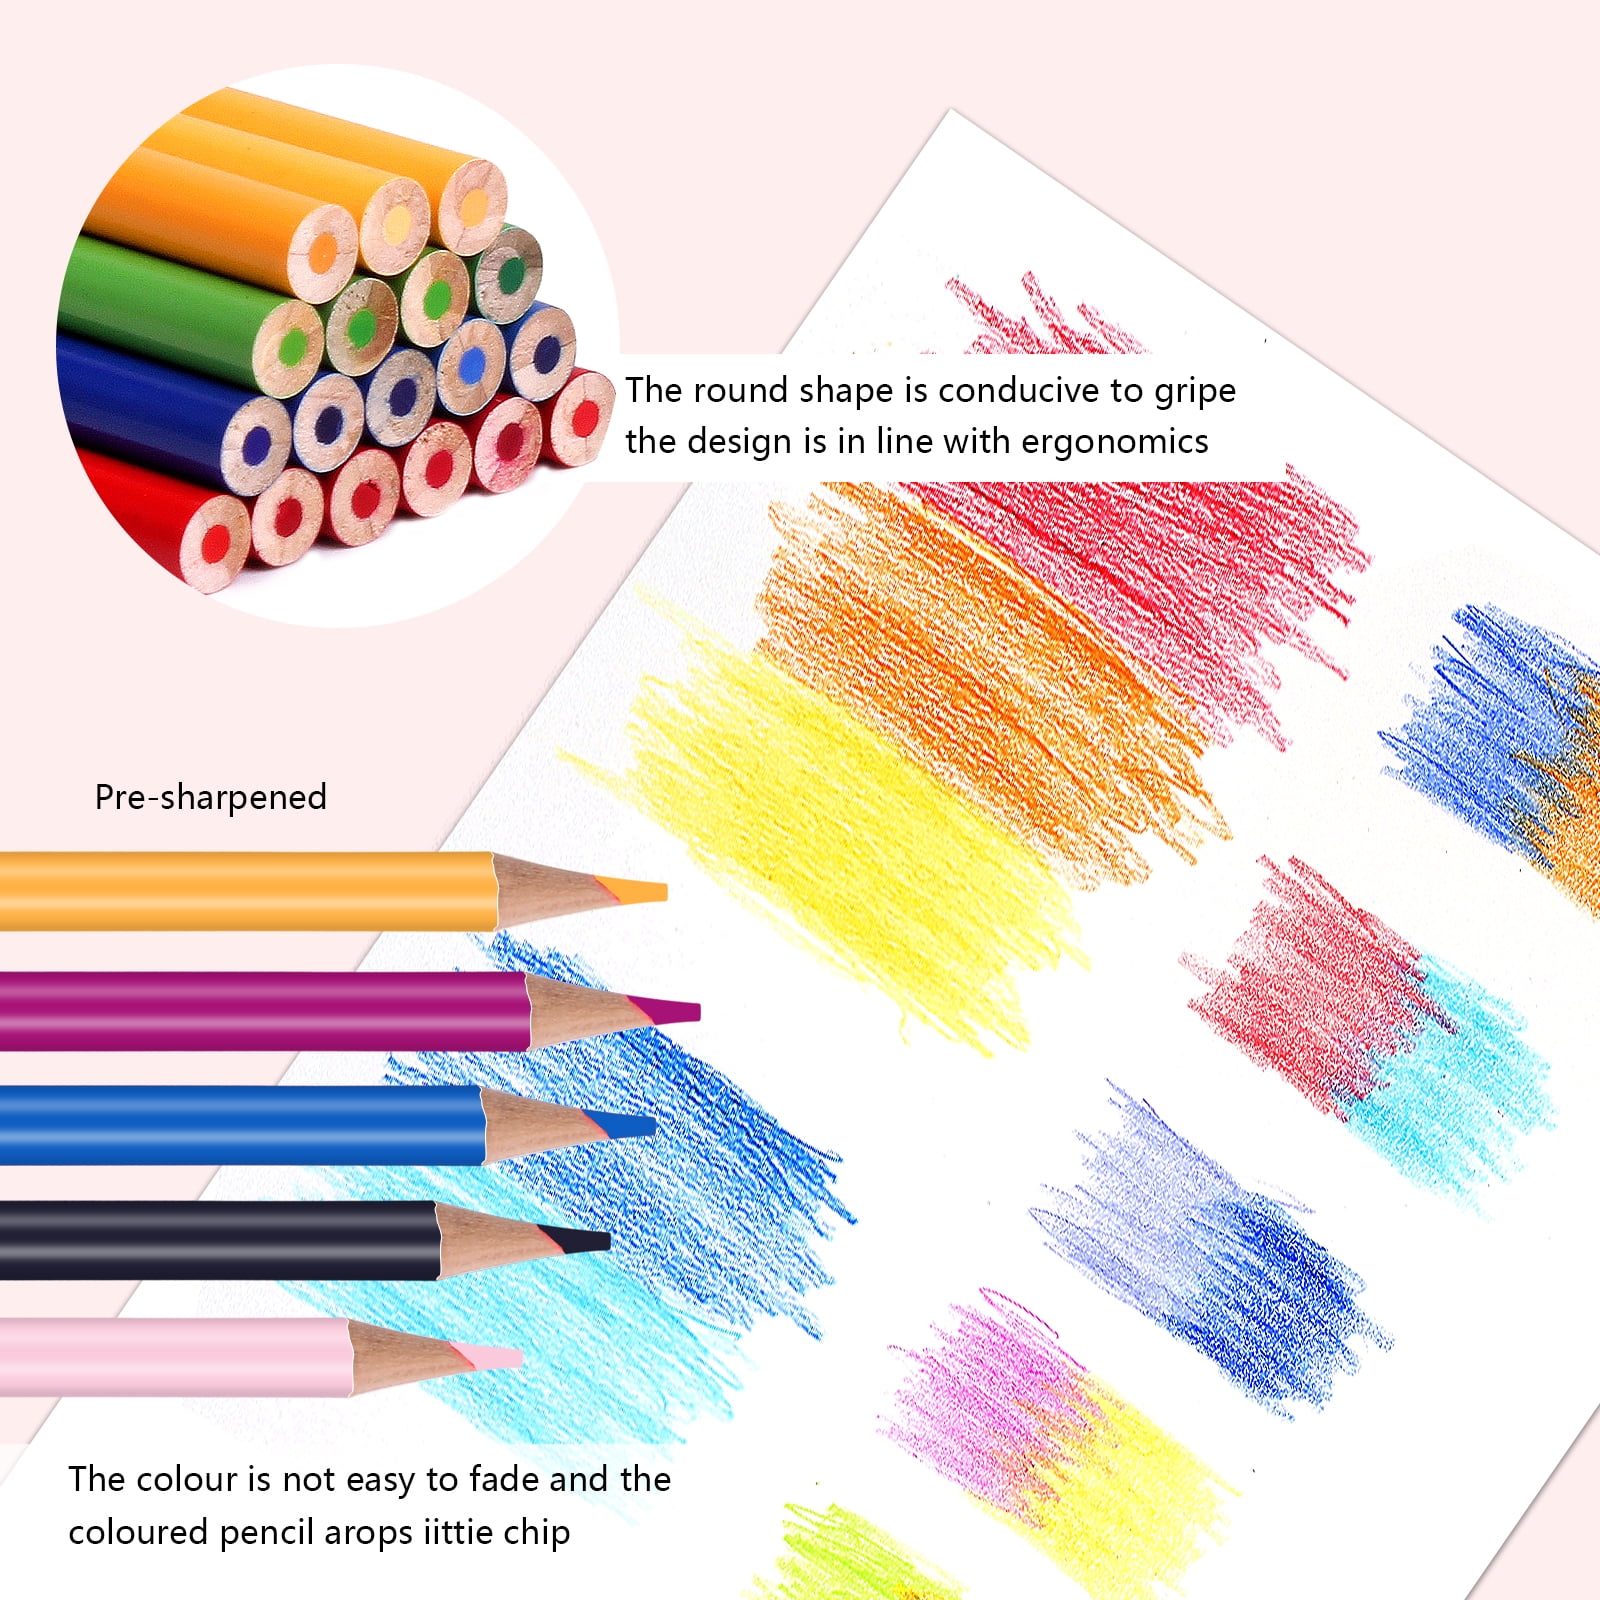  520 Colored Pencils, Professional Grade Rich Pigment Soft  Core, Coloring Pencils Suitable for Children, Adults, Artists Coloring  Sketching and Painting : Arts, Crafts & Sewing